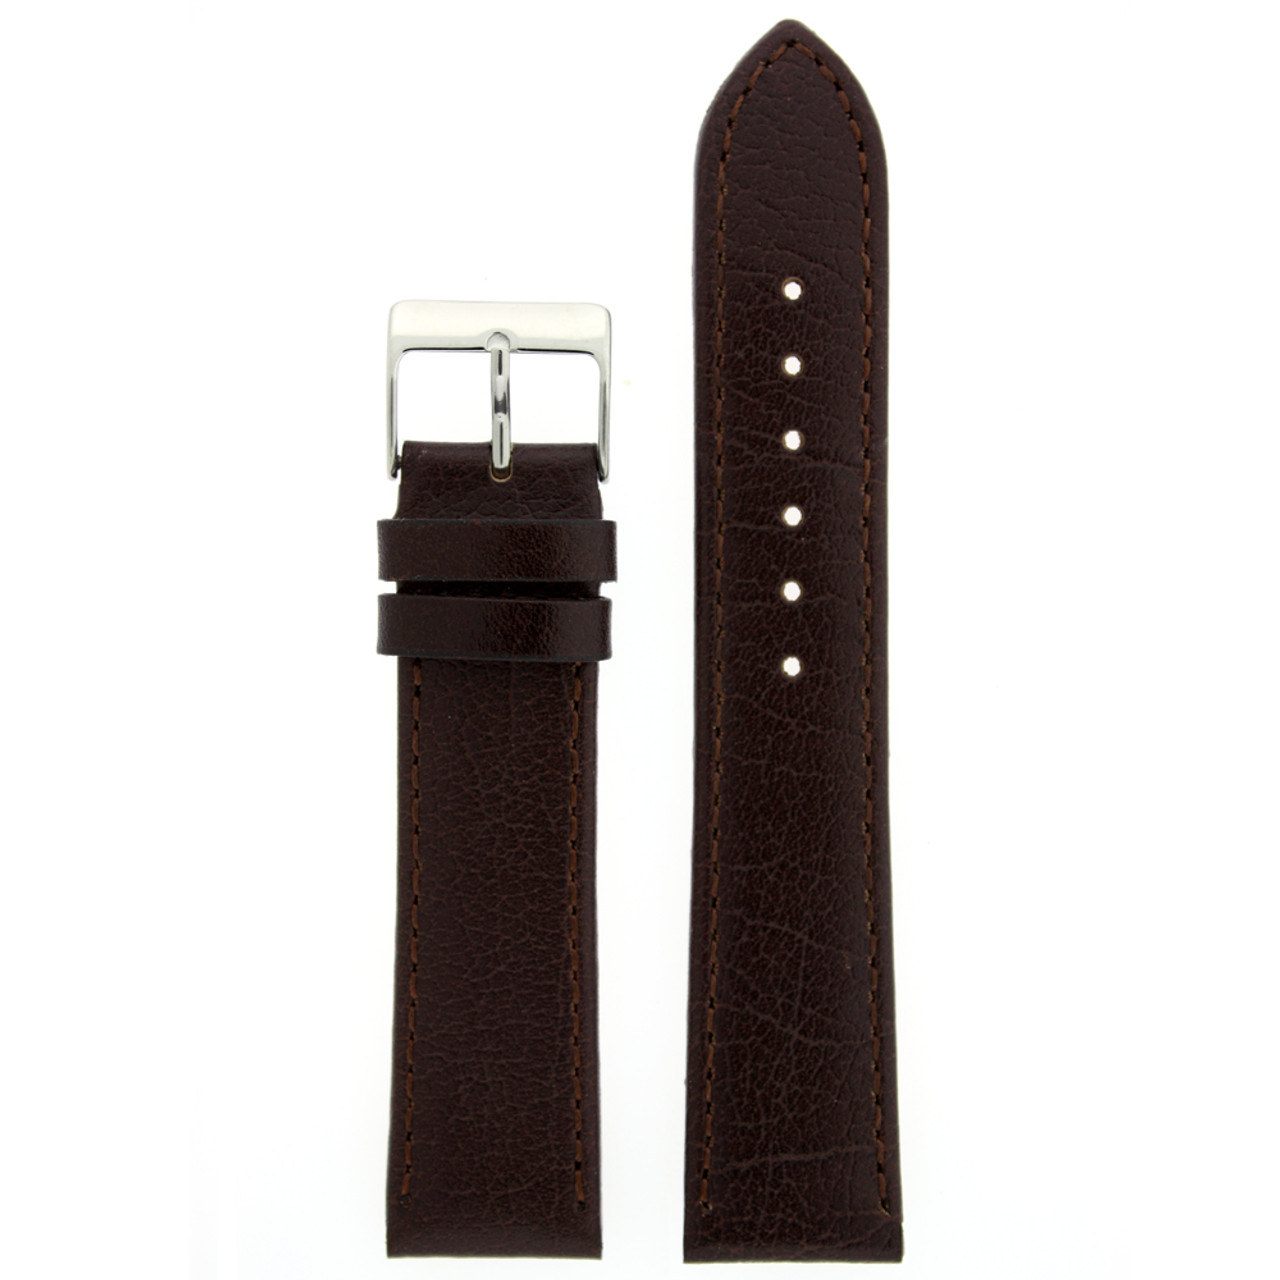 Brown Calfskin Leather Watch Band - Top View